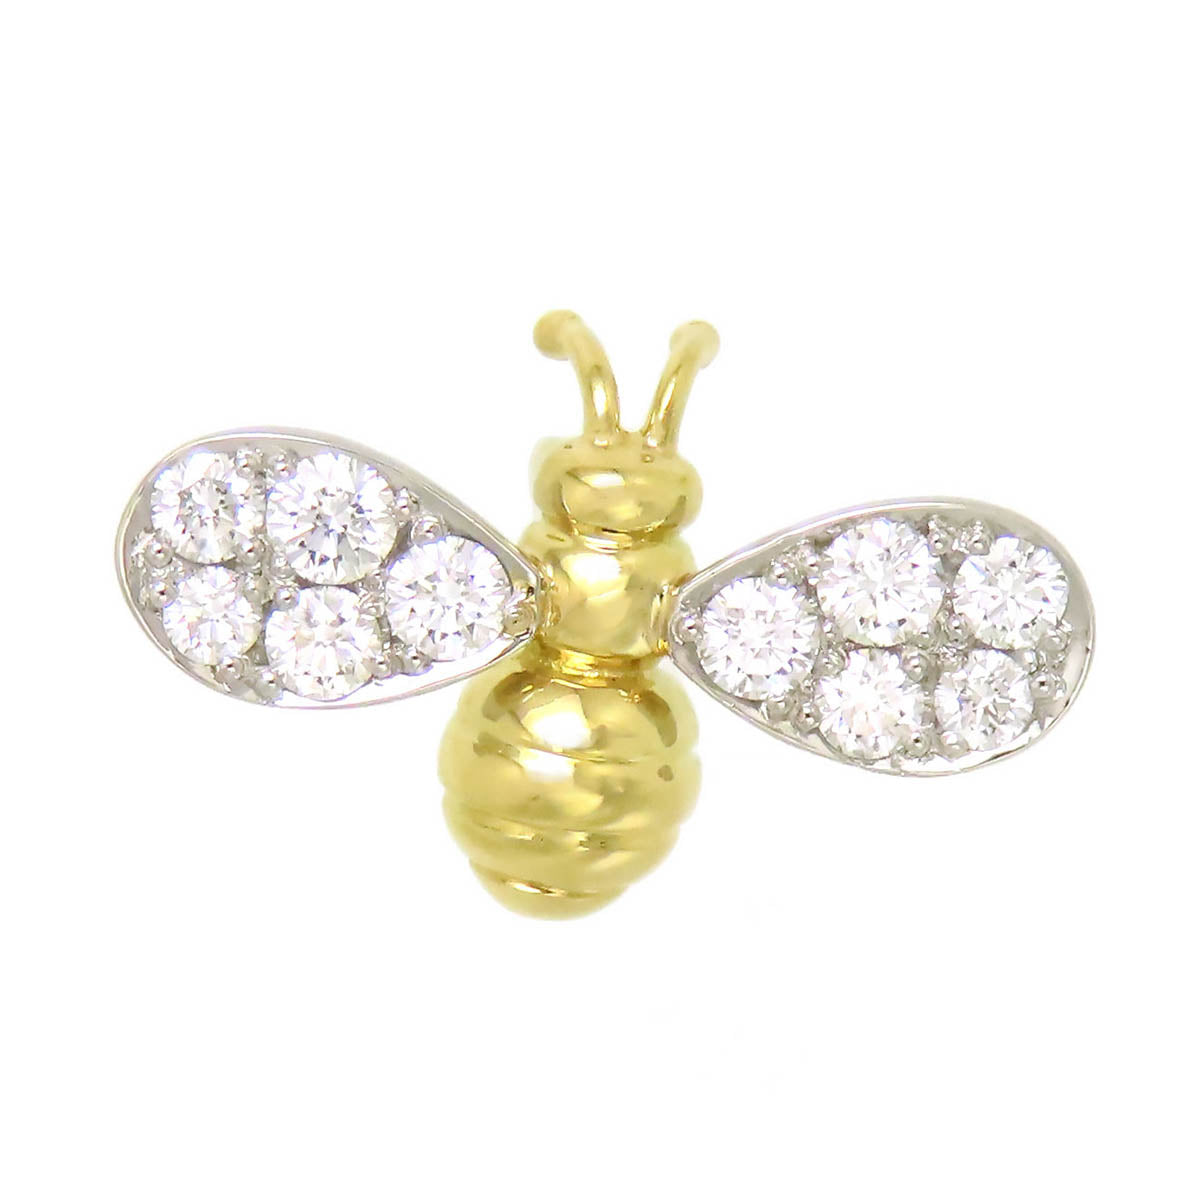 Gimel Bee Pin Brooch PT950 18K(K18YG) Unisex in Perfect Condition -